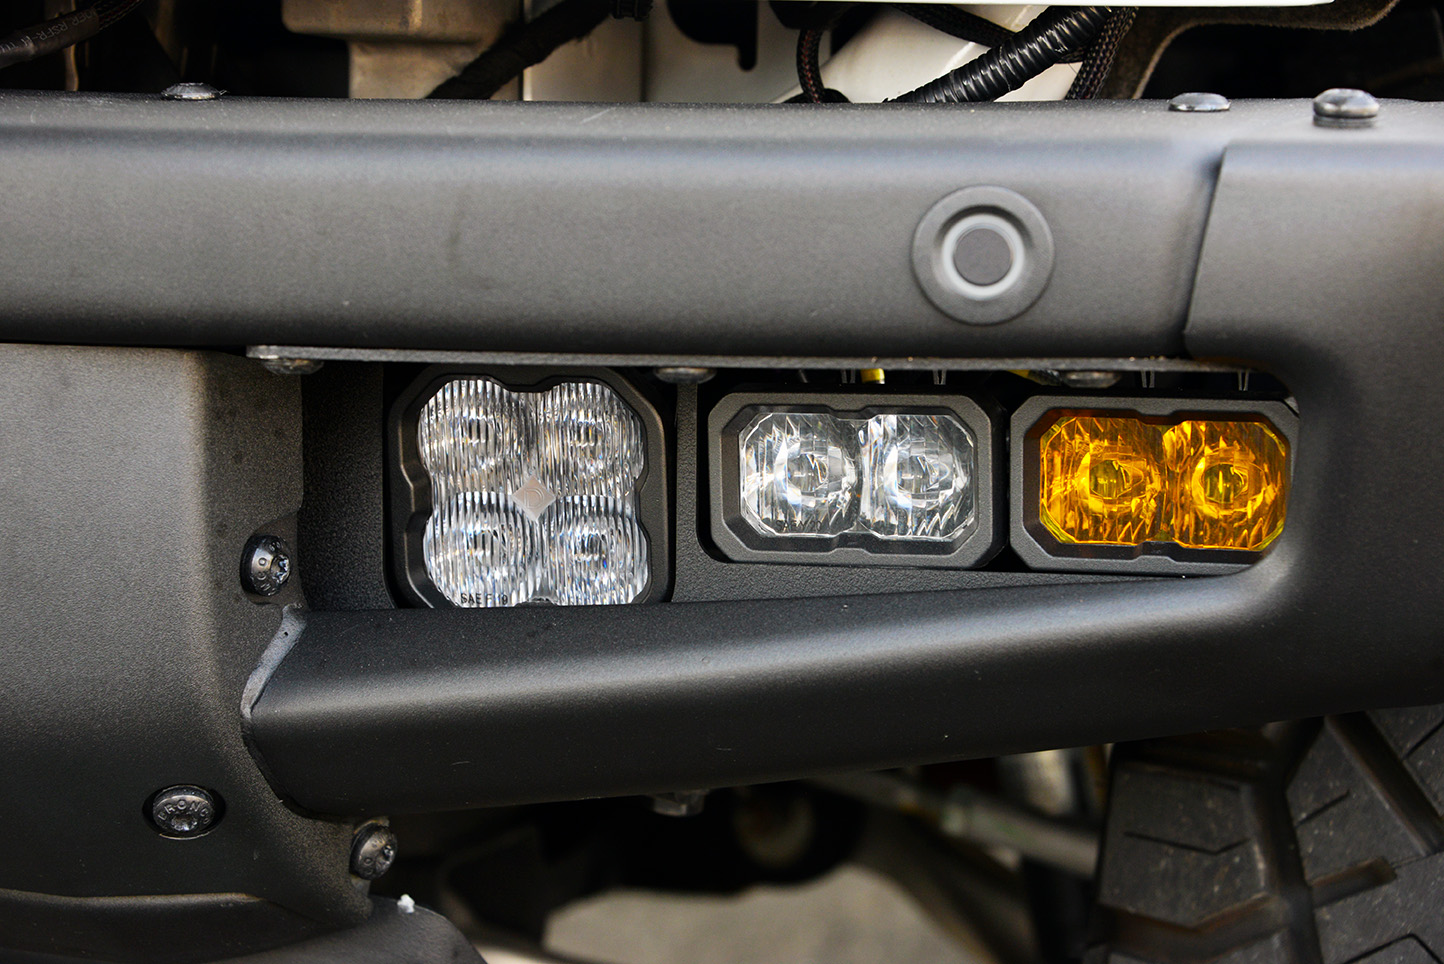 Ford Bronco TRIPLE FOG KITS | New Flush Mount Kit Now Available at 4x4TruckLEDs.com 16